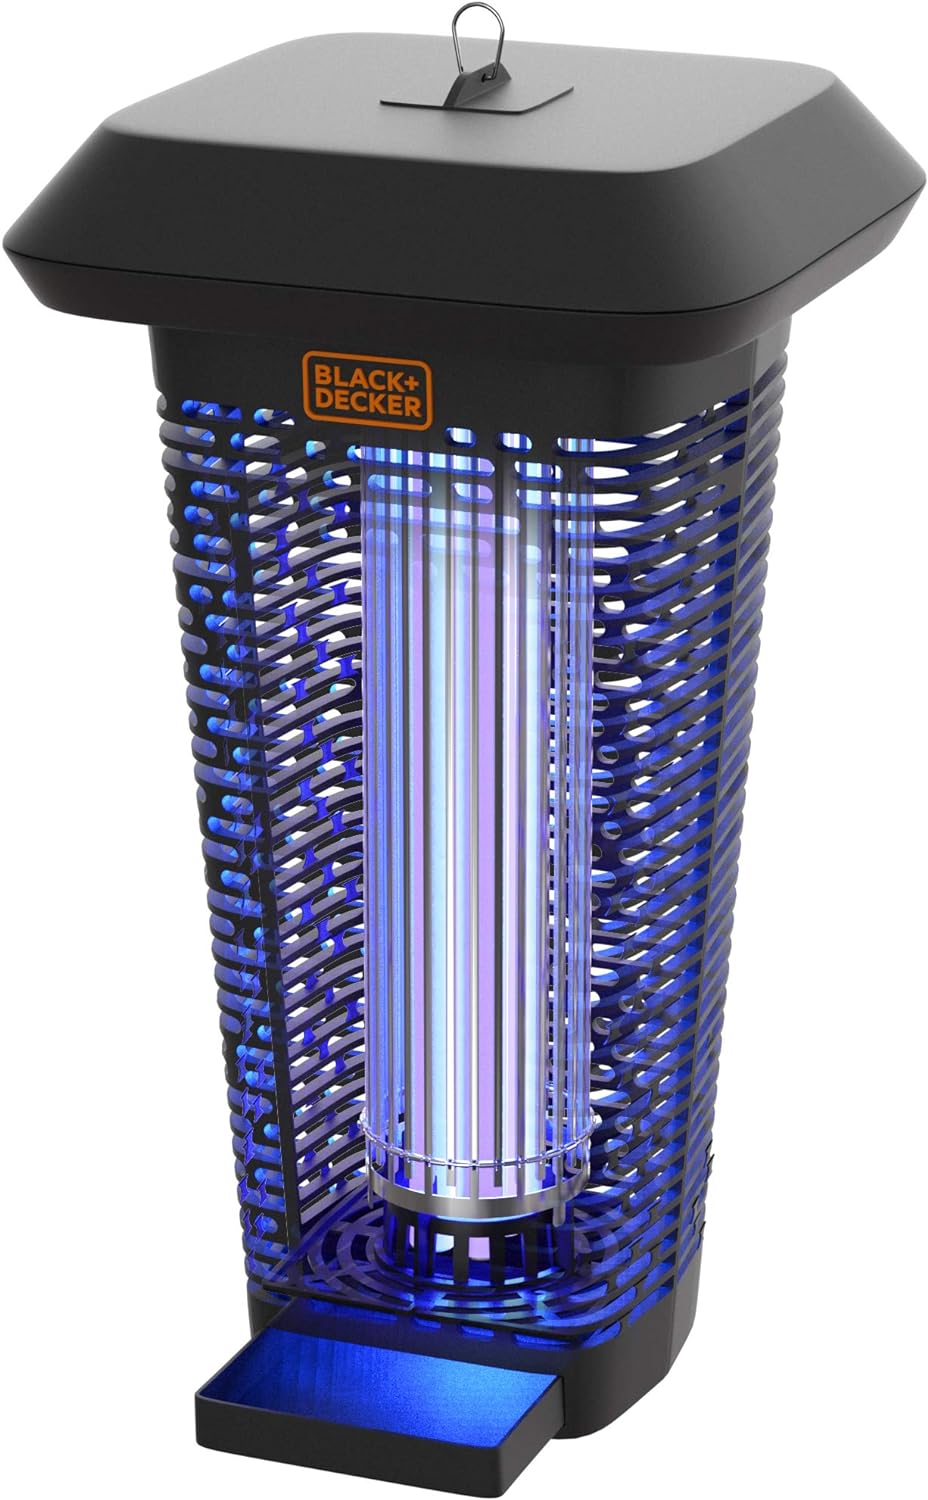 https://bigbigmart.com/wp-content/uploads/2023/09/BLACKDECKER-Bug-Zapper-Fly-Trap-Mosquito-Repellent-Gnat-Killer-Indoor-Outdoor-Electric-UV-Bug-Catcher-for-Insects-2-Acre-Coverage-for-Home-Deck-Garden-Patio-Commercial-Strength5.jpg